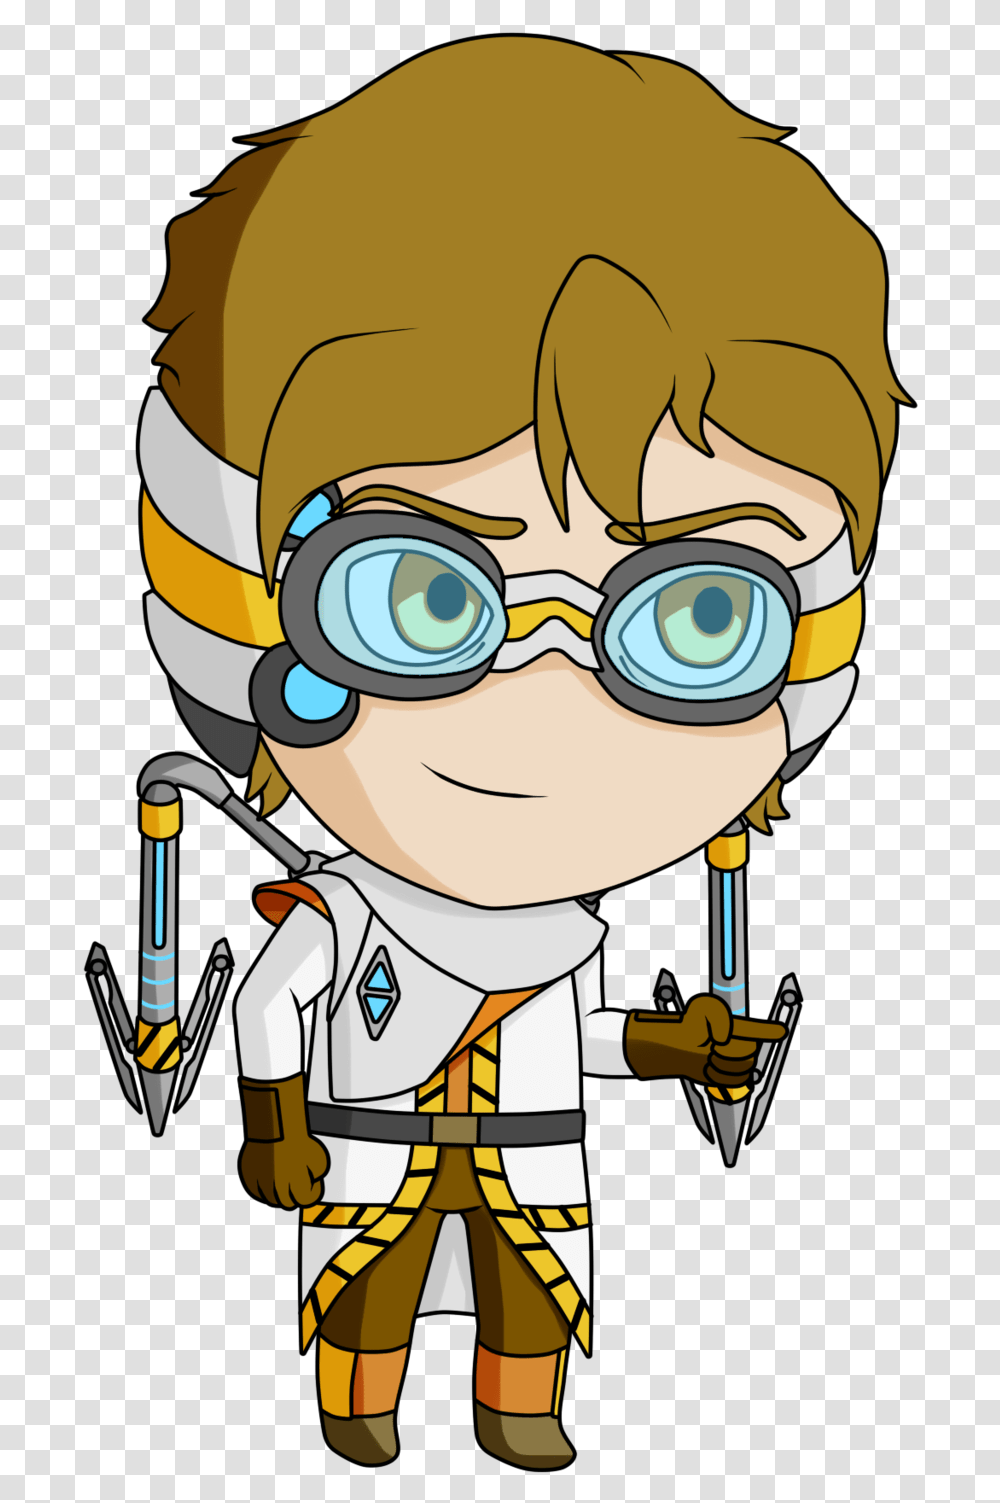 A Birthday Gift For A Good Friend Of Mine G Octavius Cartoon, Glasses, Accessories, Accessory, Goggles Transparent Png